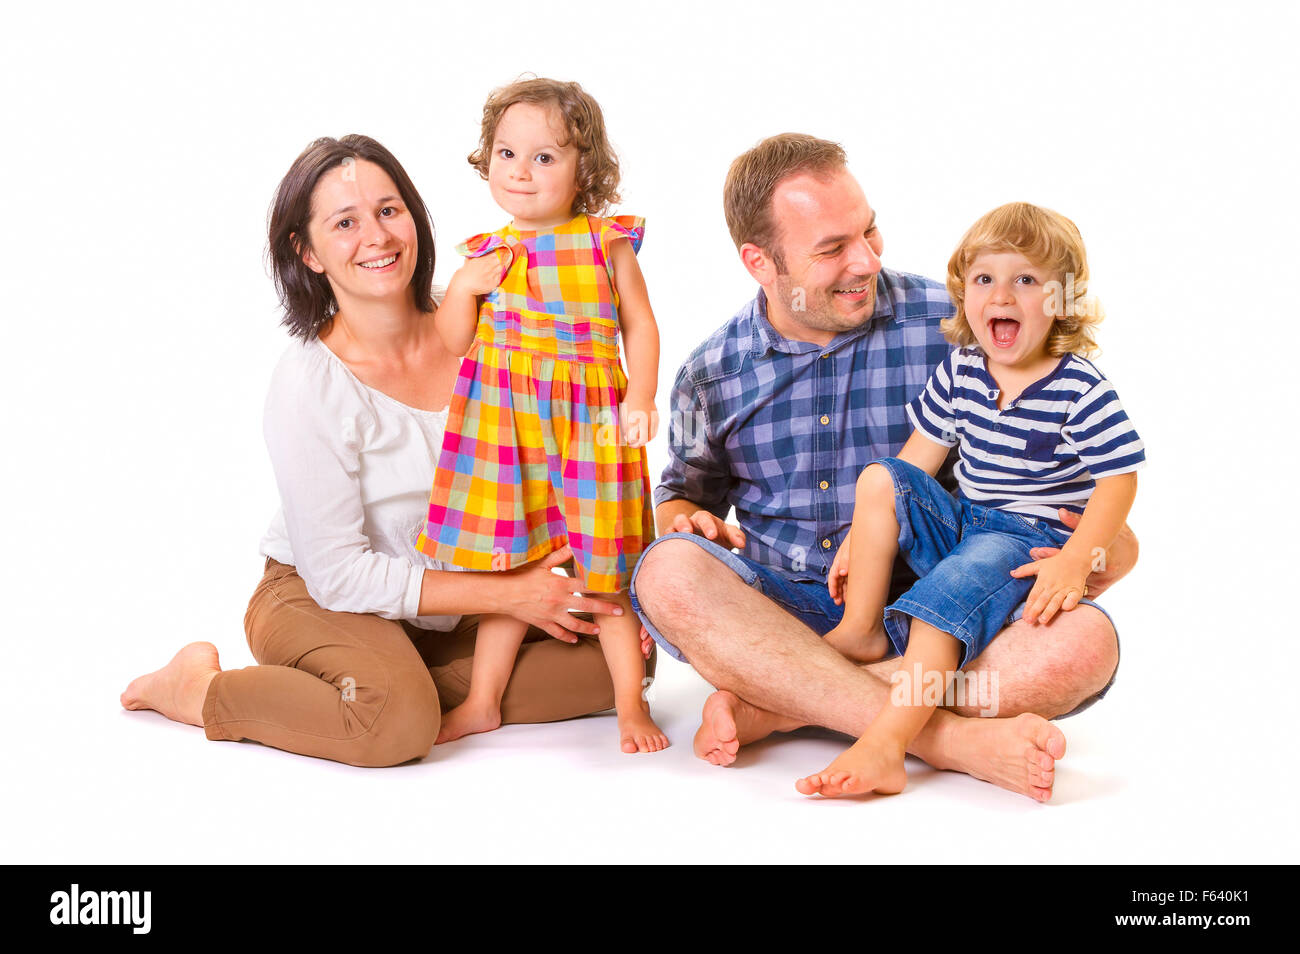 Happy family of four smiling while standing against white background. Stock Photo